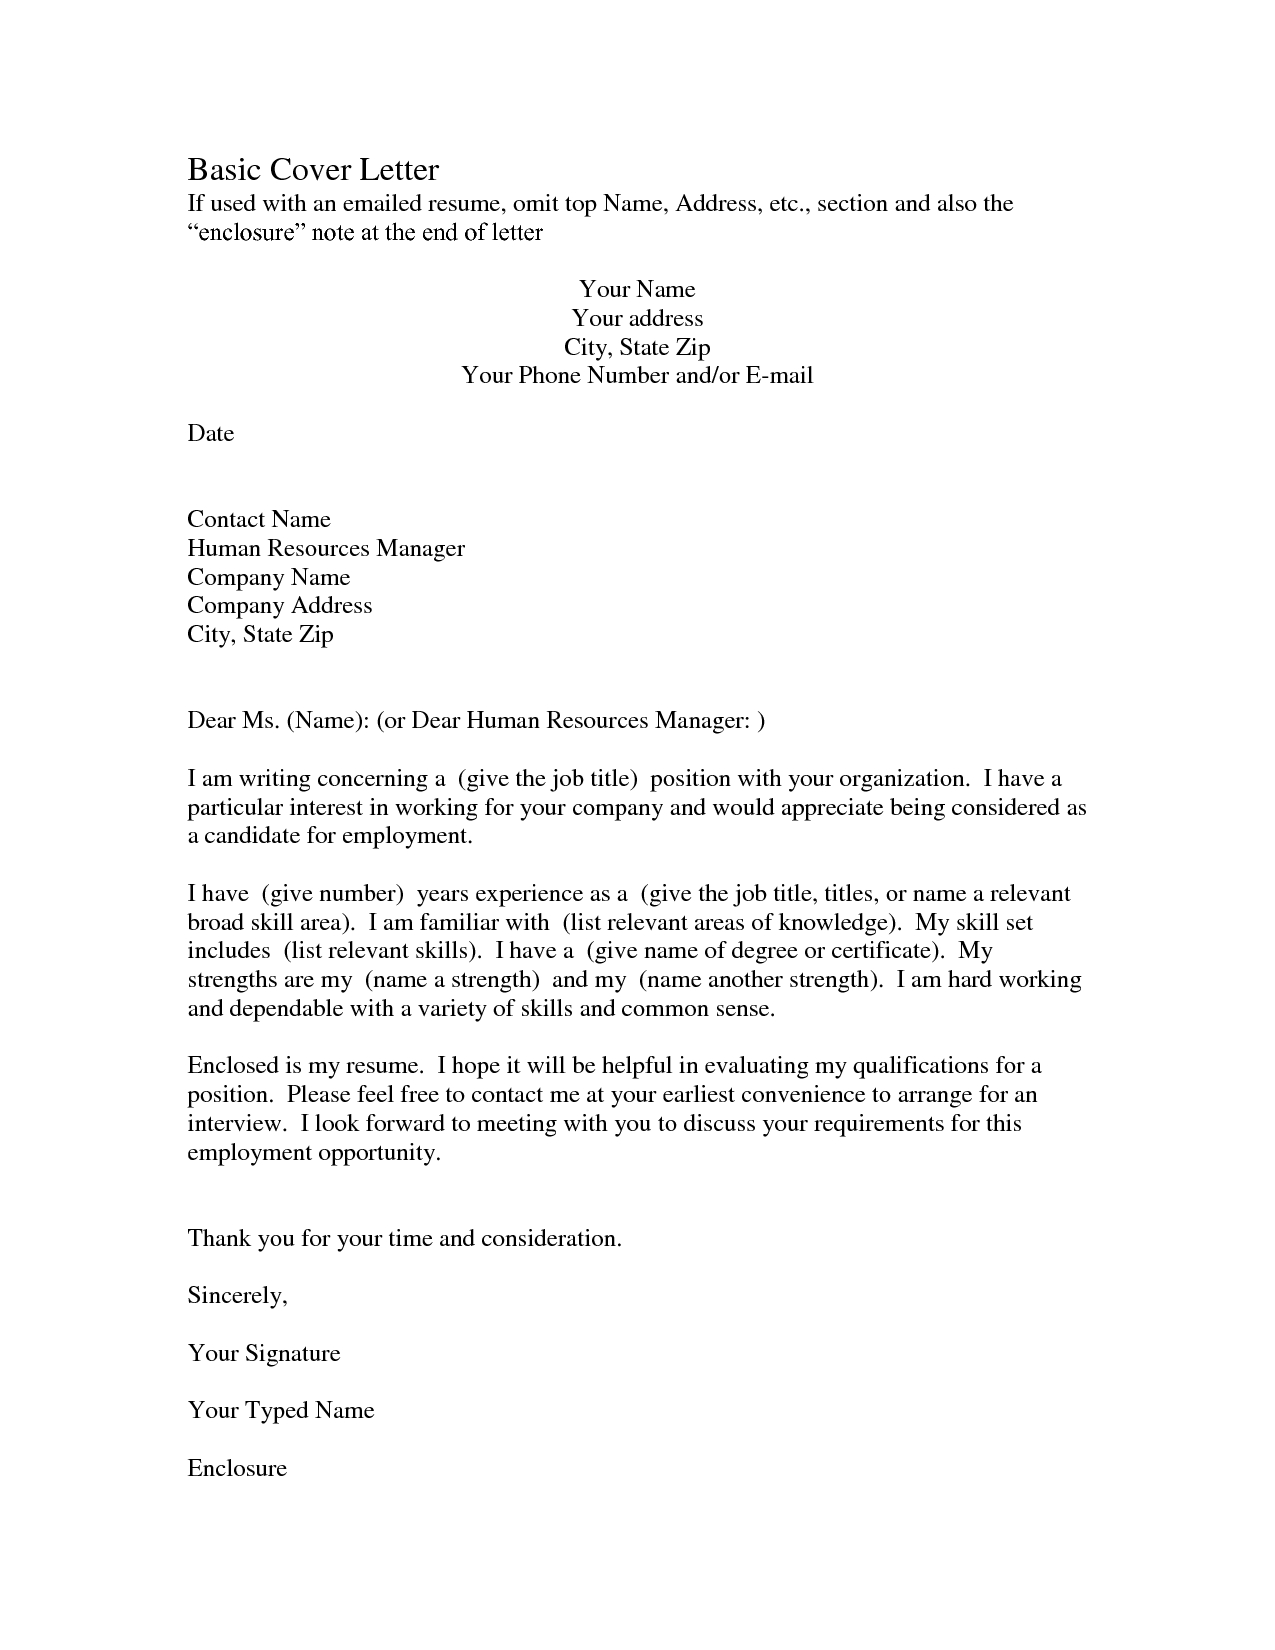 Company Letter Template - This Cover Letter Sample Shows How A Resumes for Teachers Can Help